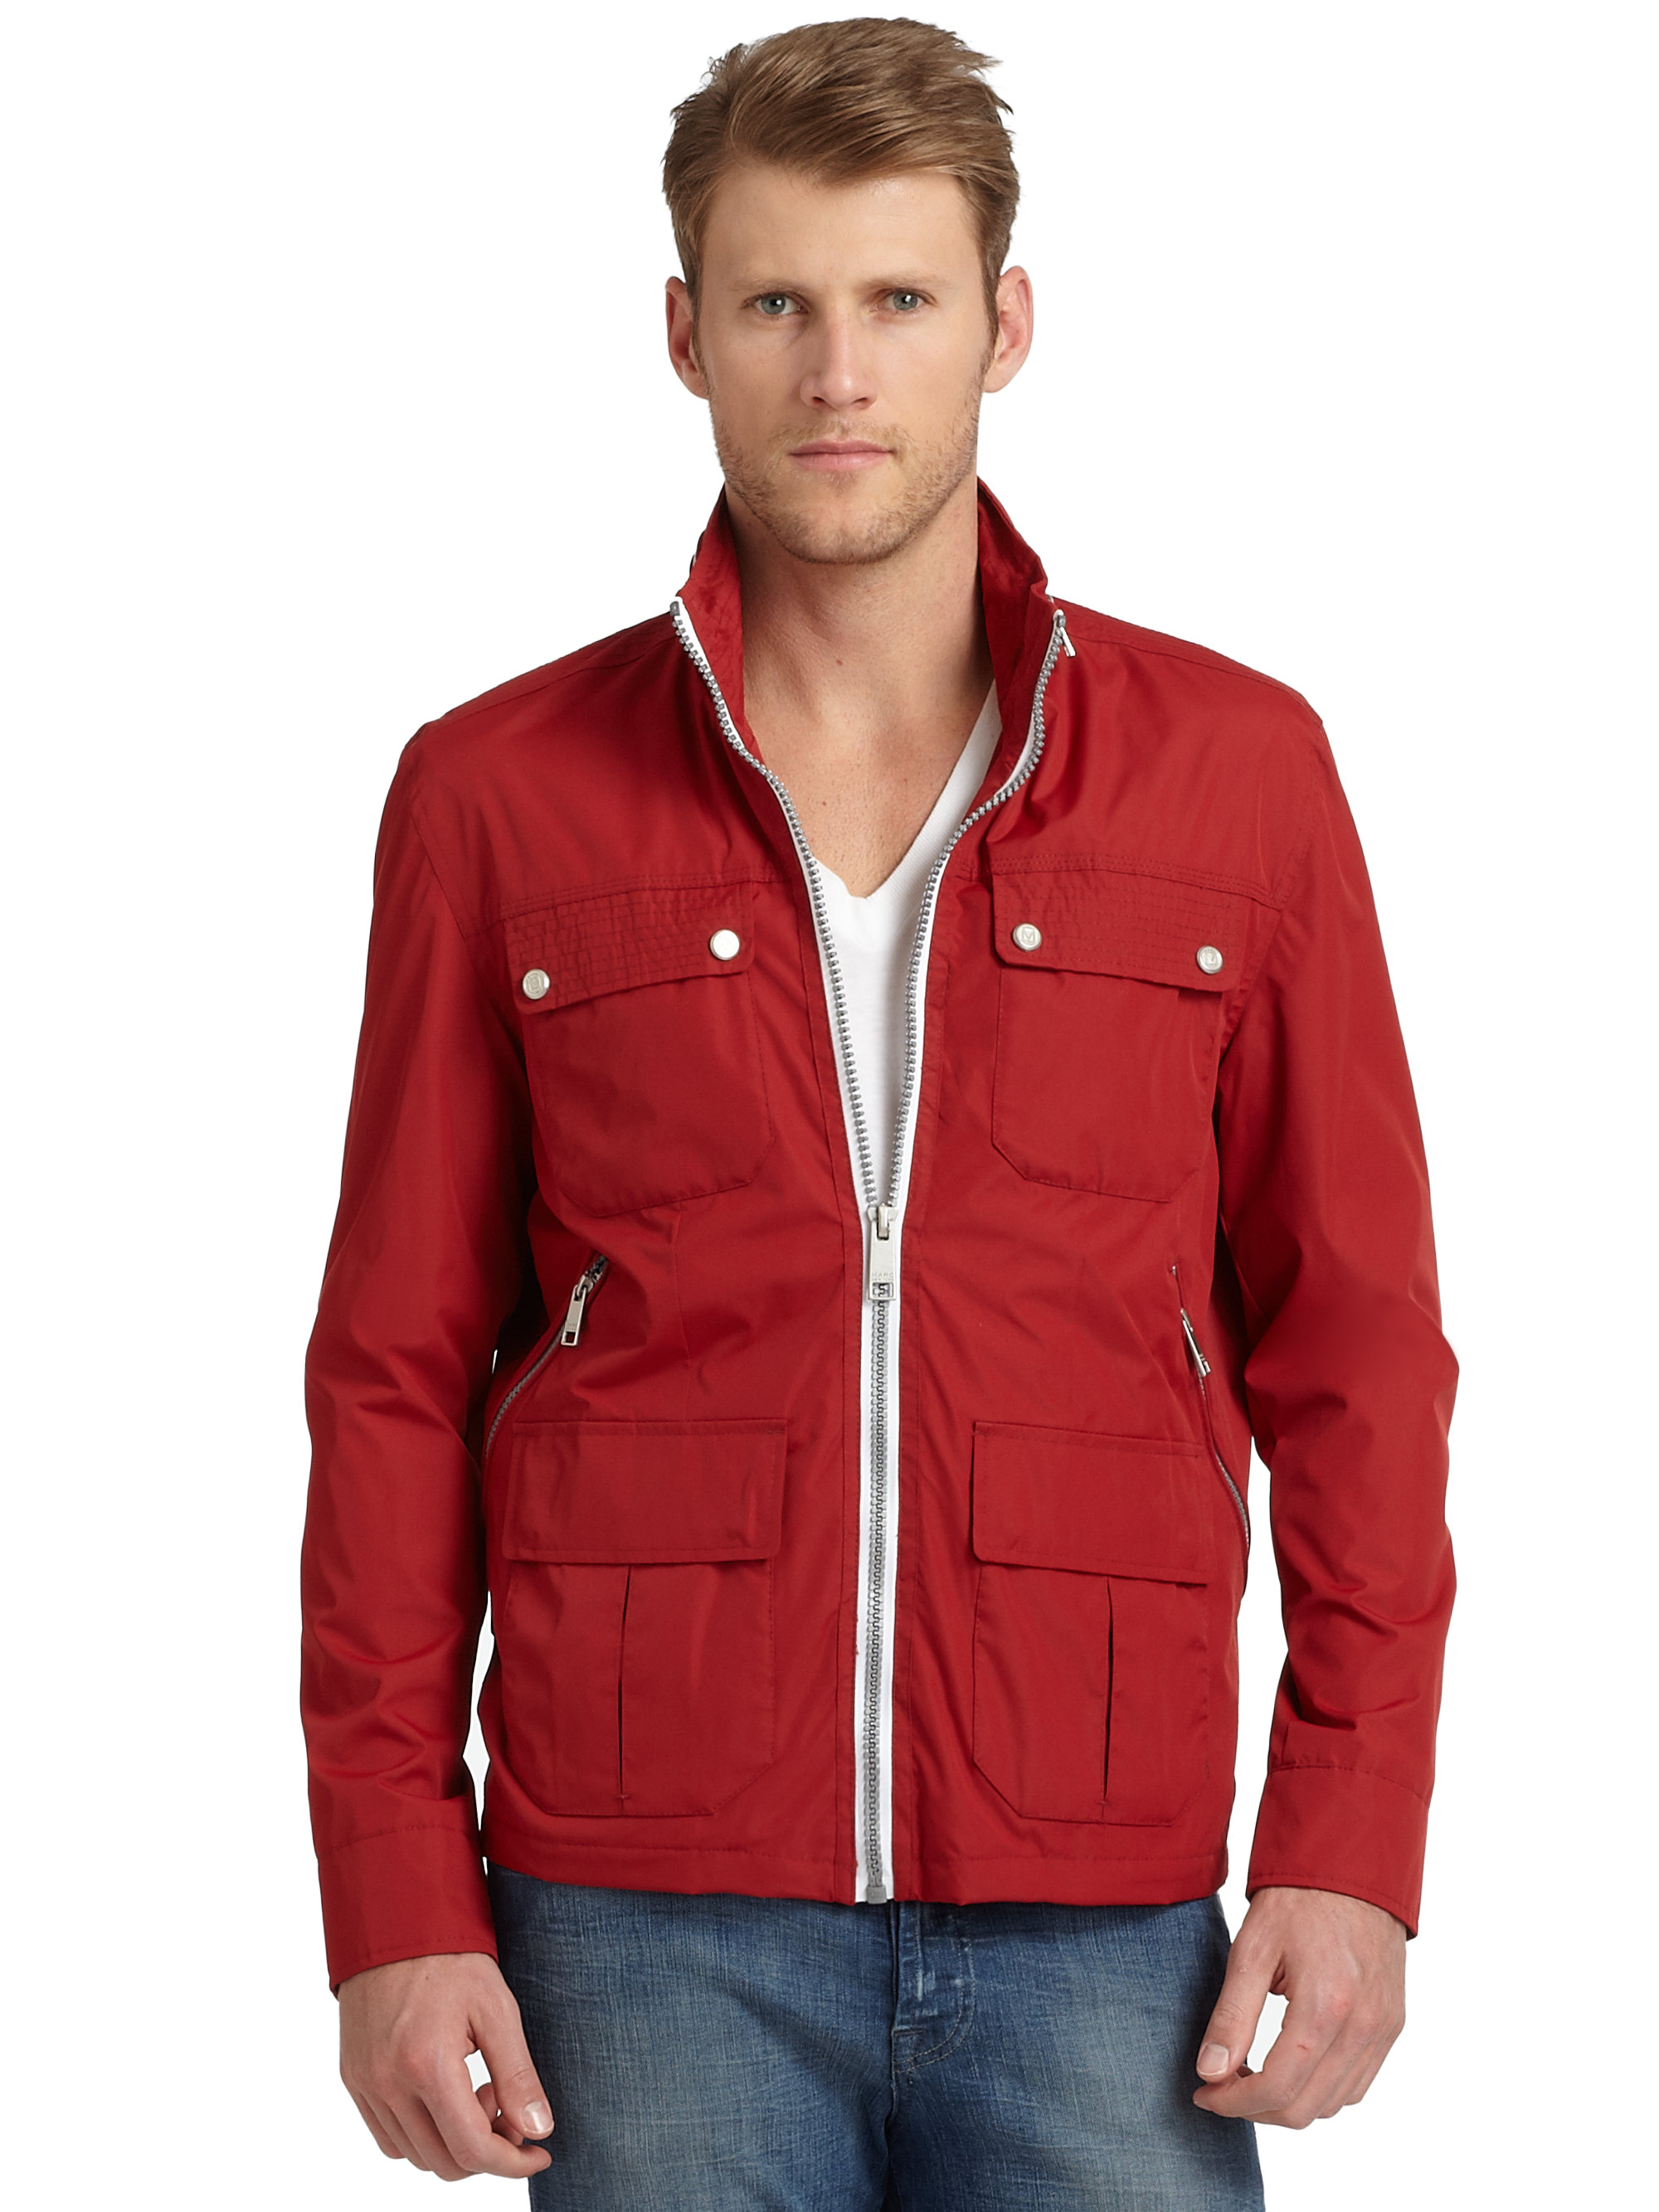 Lyst - Marc New York Chase Rain Jacket in Red for Men